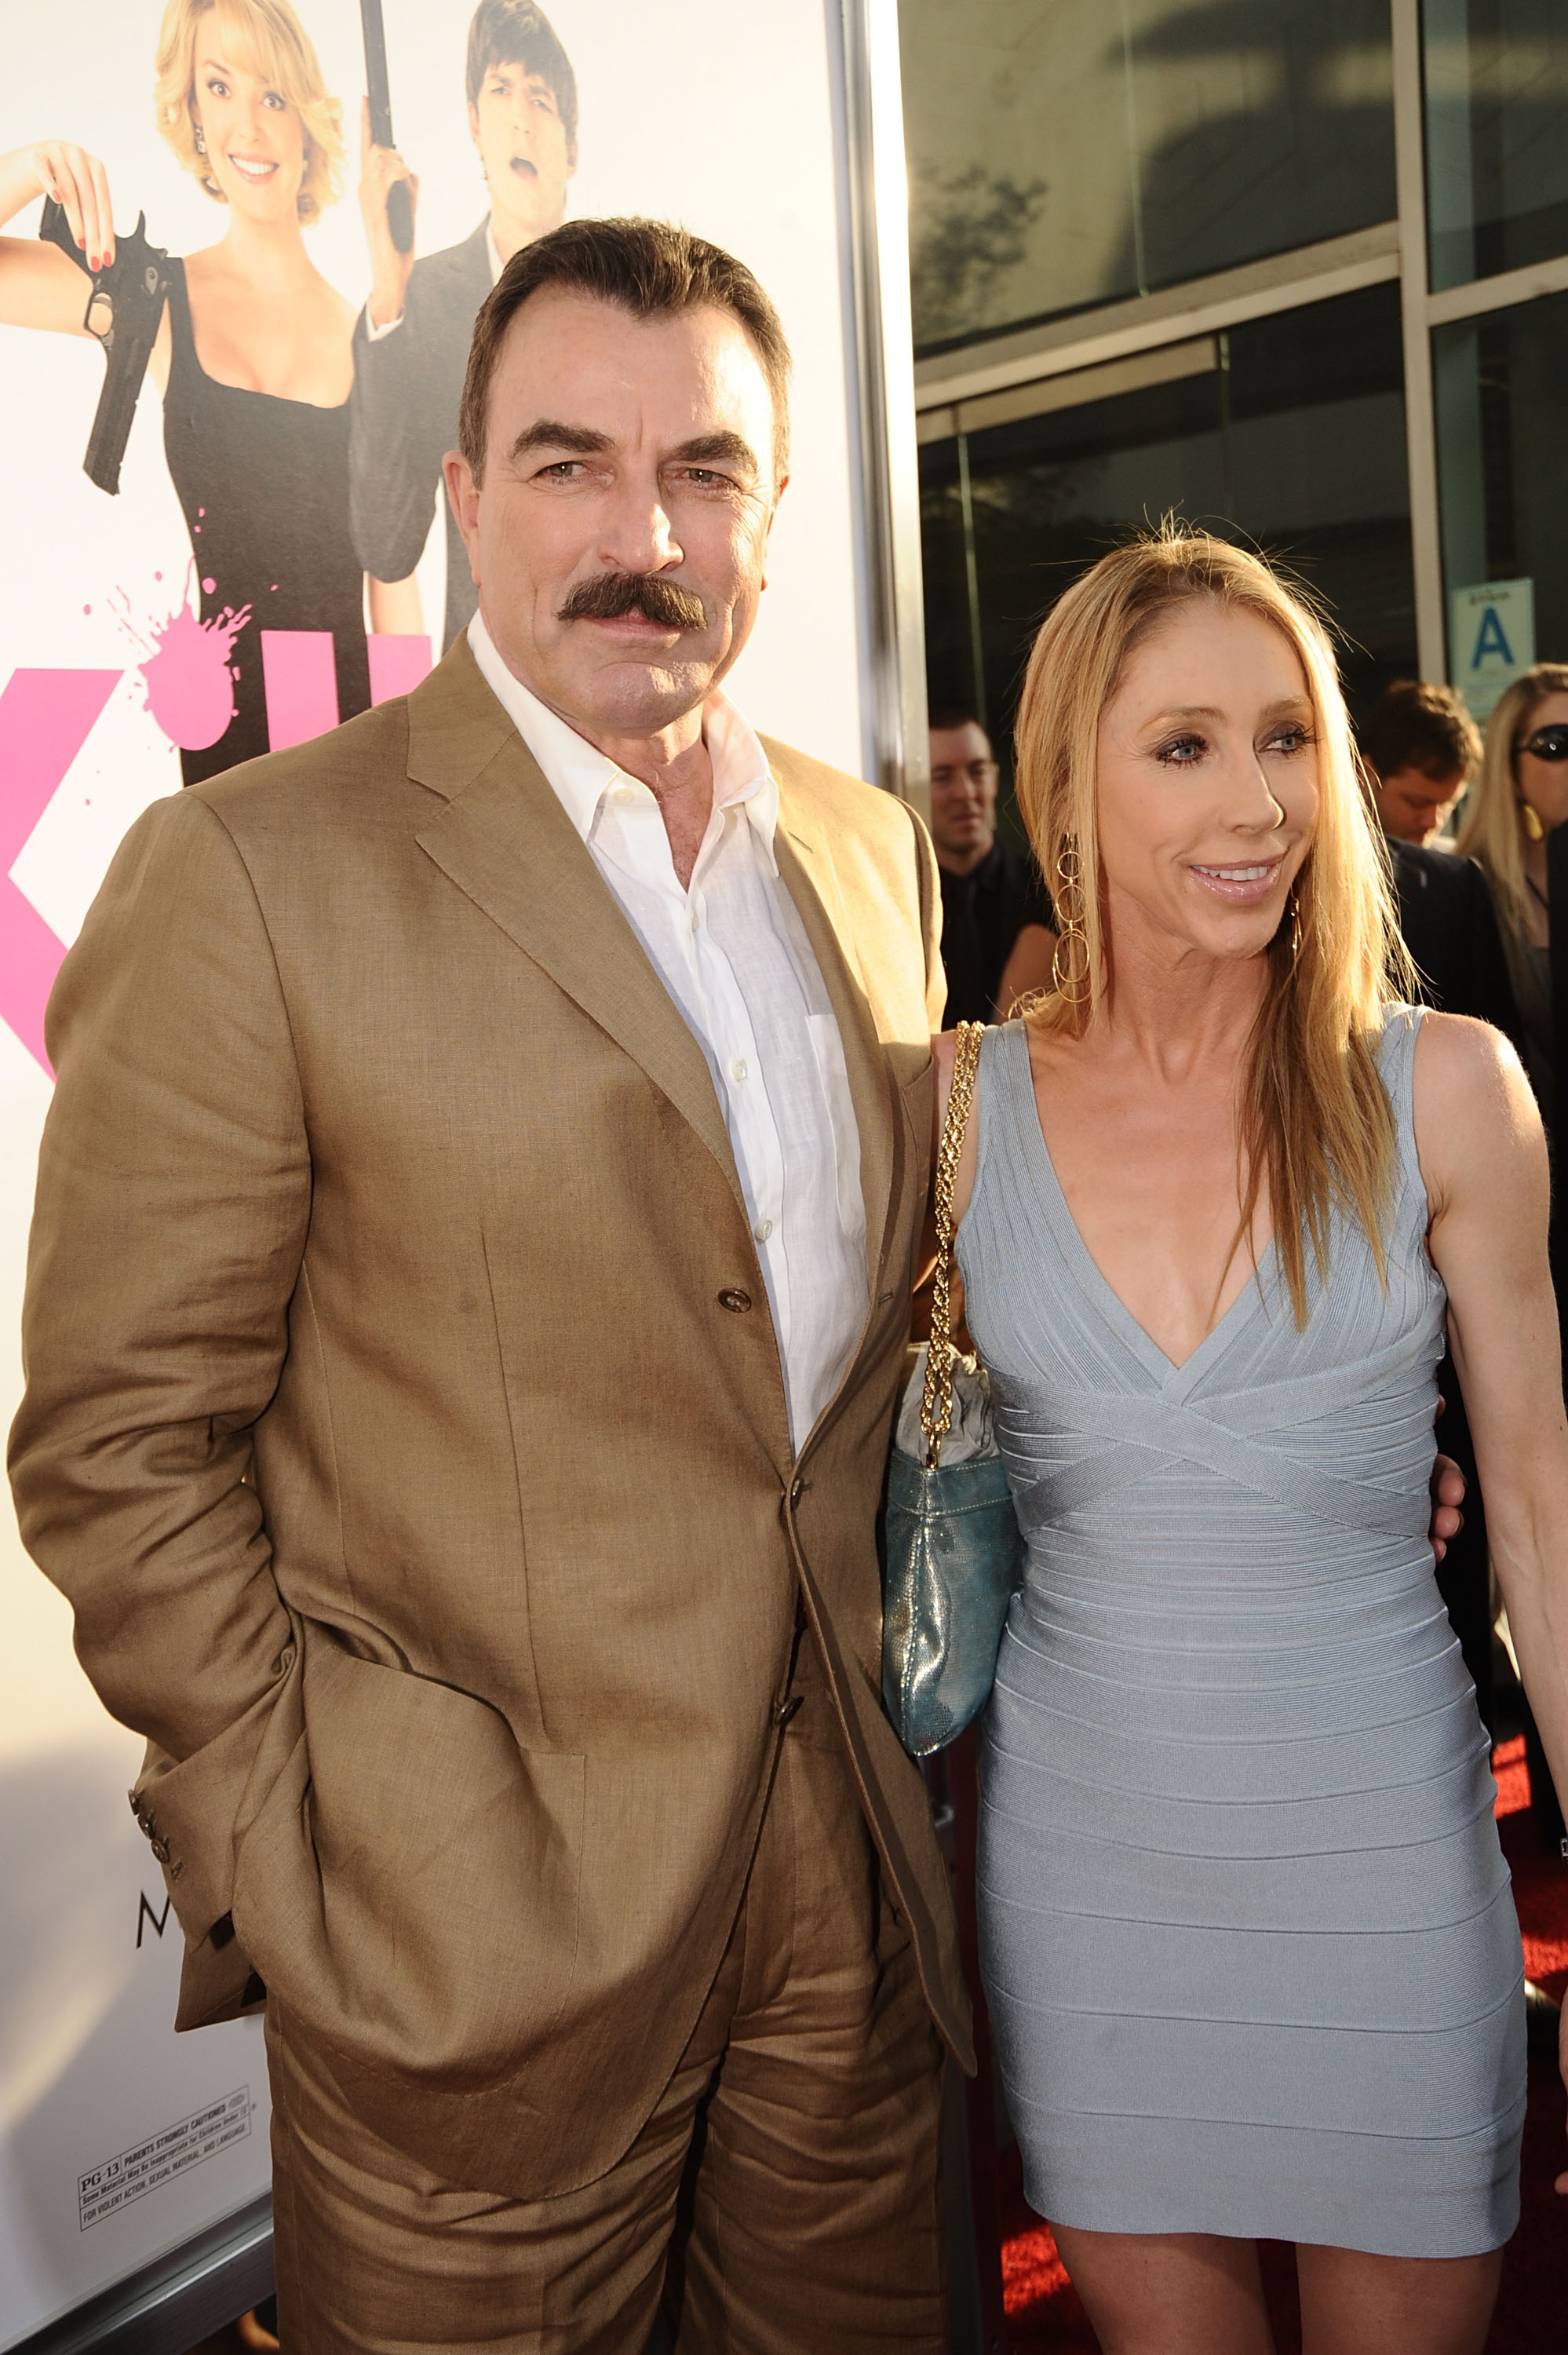 Tom Selleck and Jillie Mack arrive at the Los Angeles premiere of "Killers" in Hollywood, California, on June 1, 2010. | Source: Getty Images